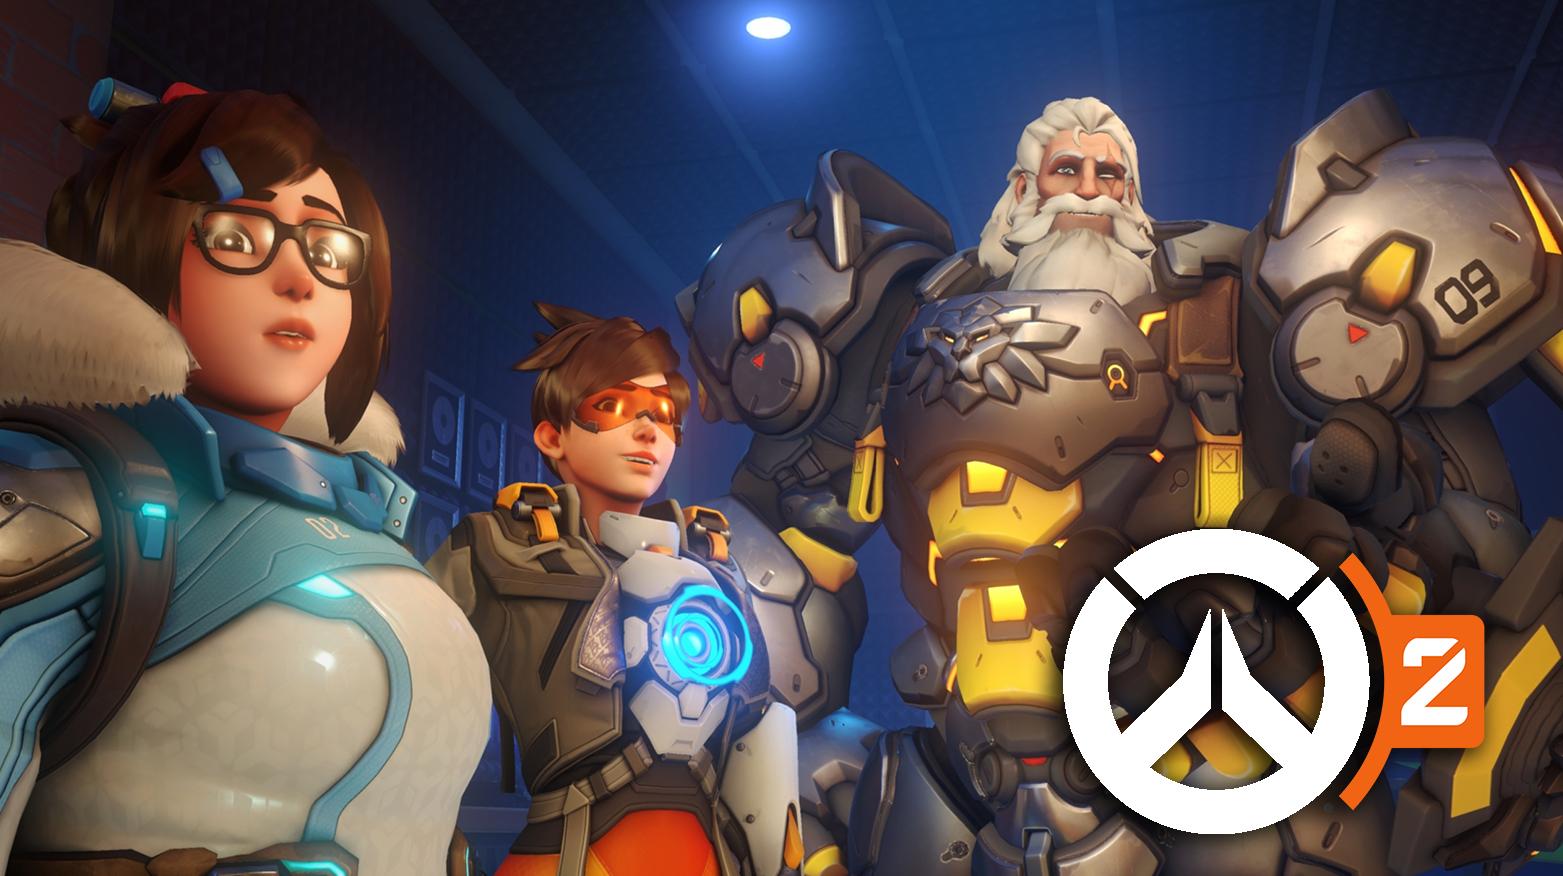 Overwatch 2 Mei, Tracer, and Reinhardt skins